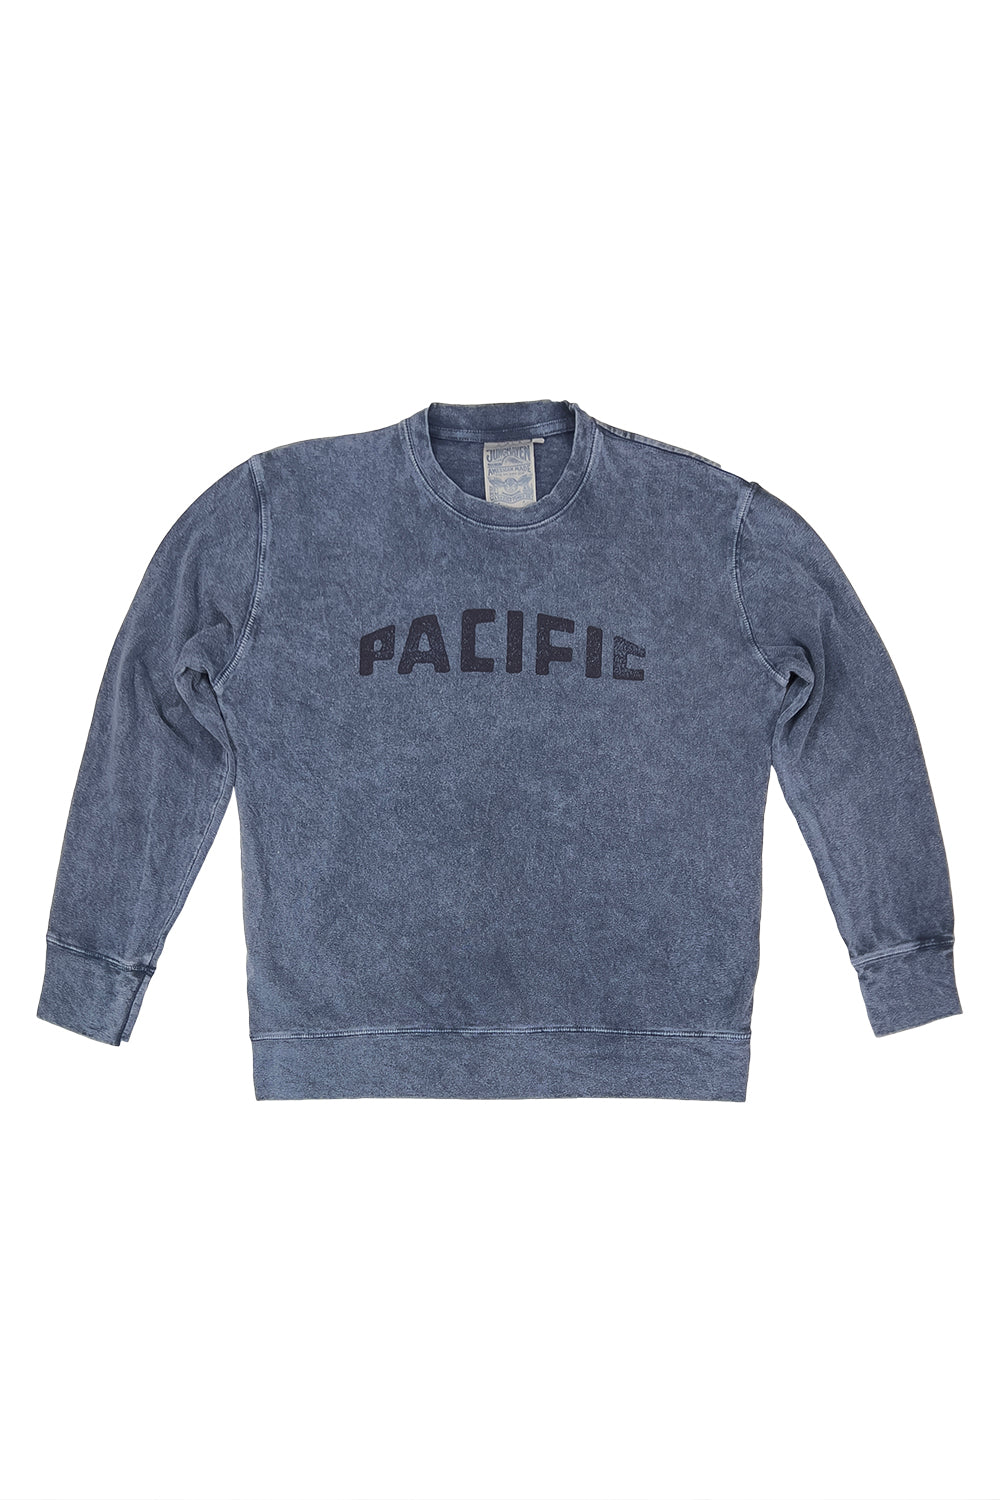 Pacific California Pullover | Jungmaven Hemp Clothing & Accessories / Color: